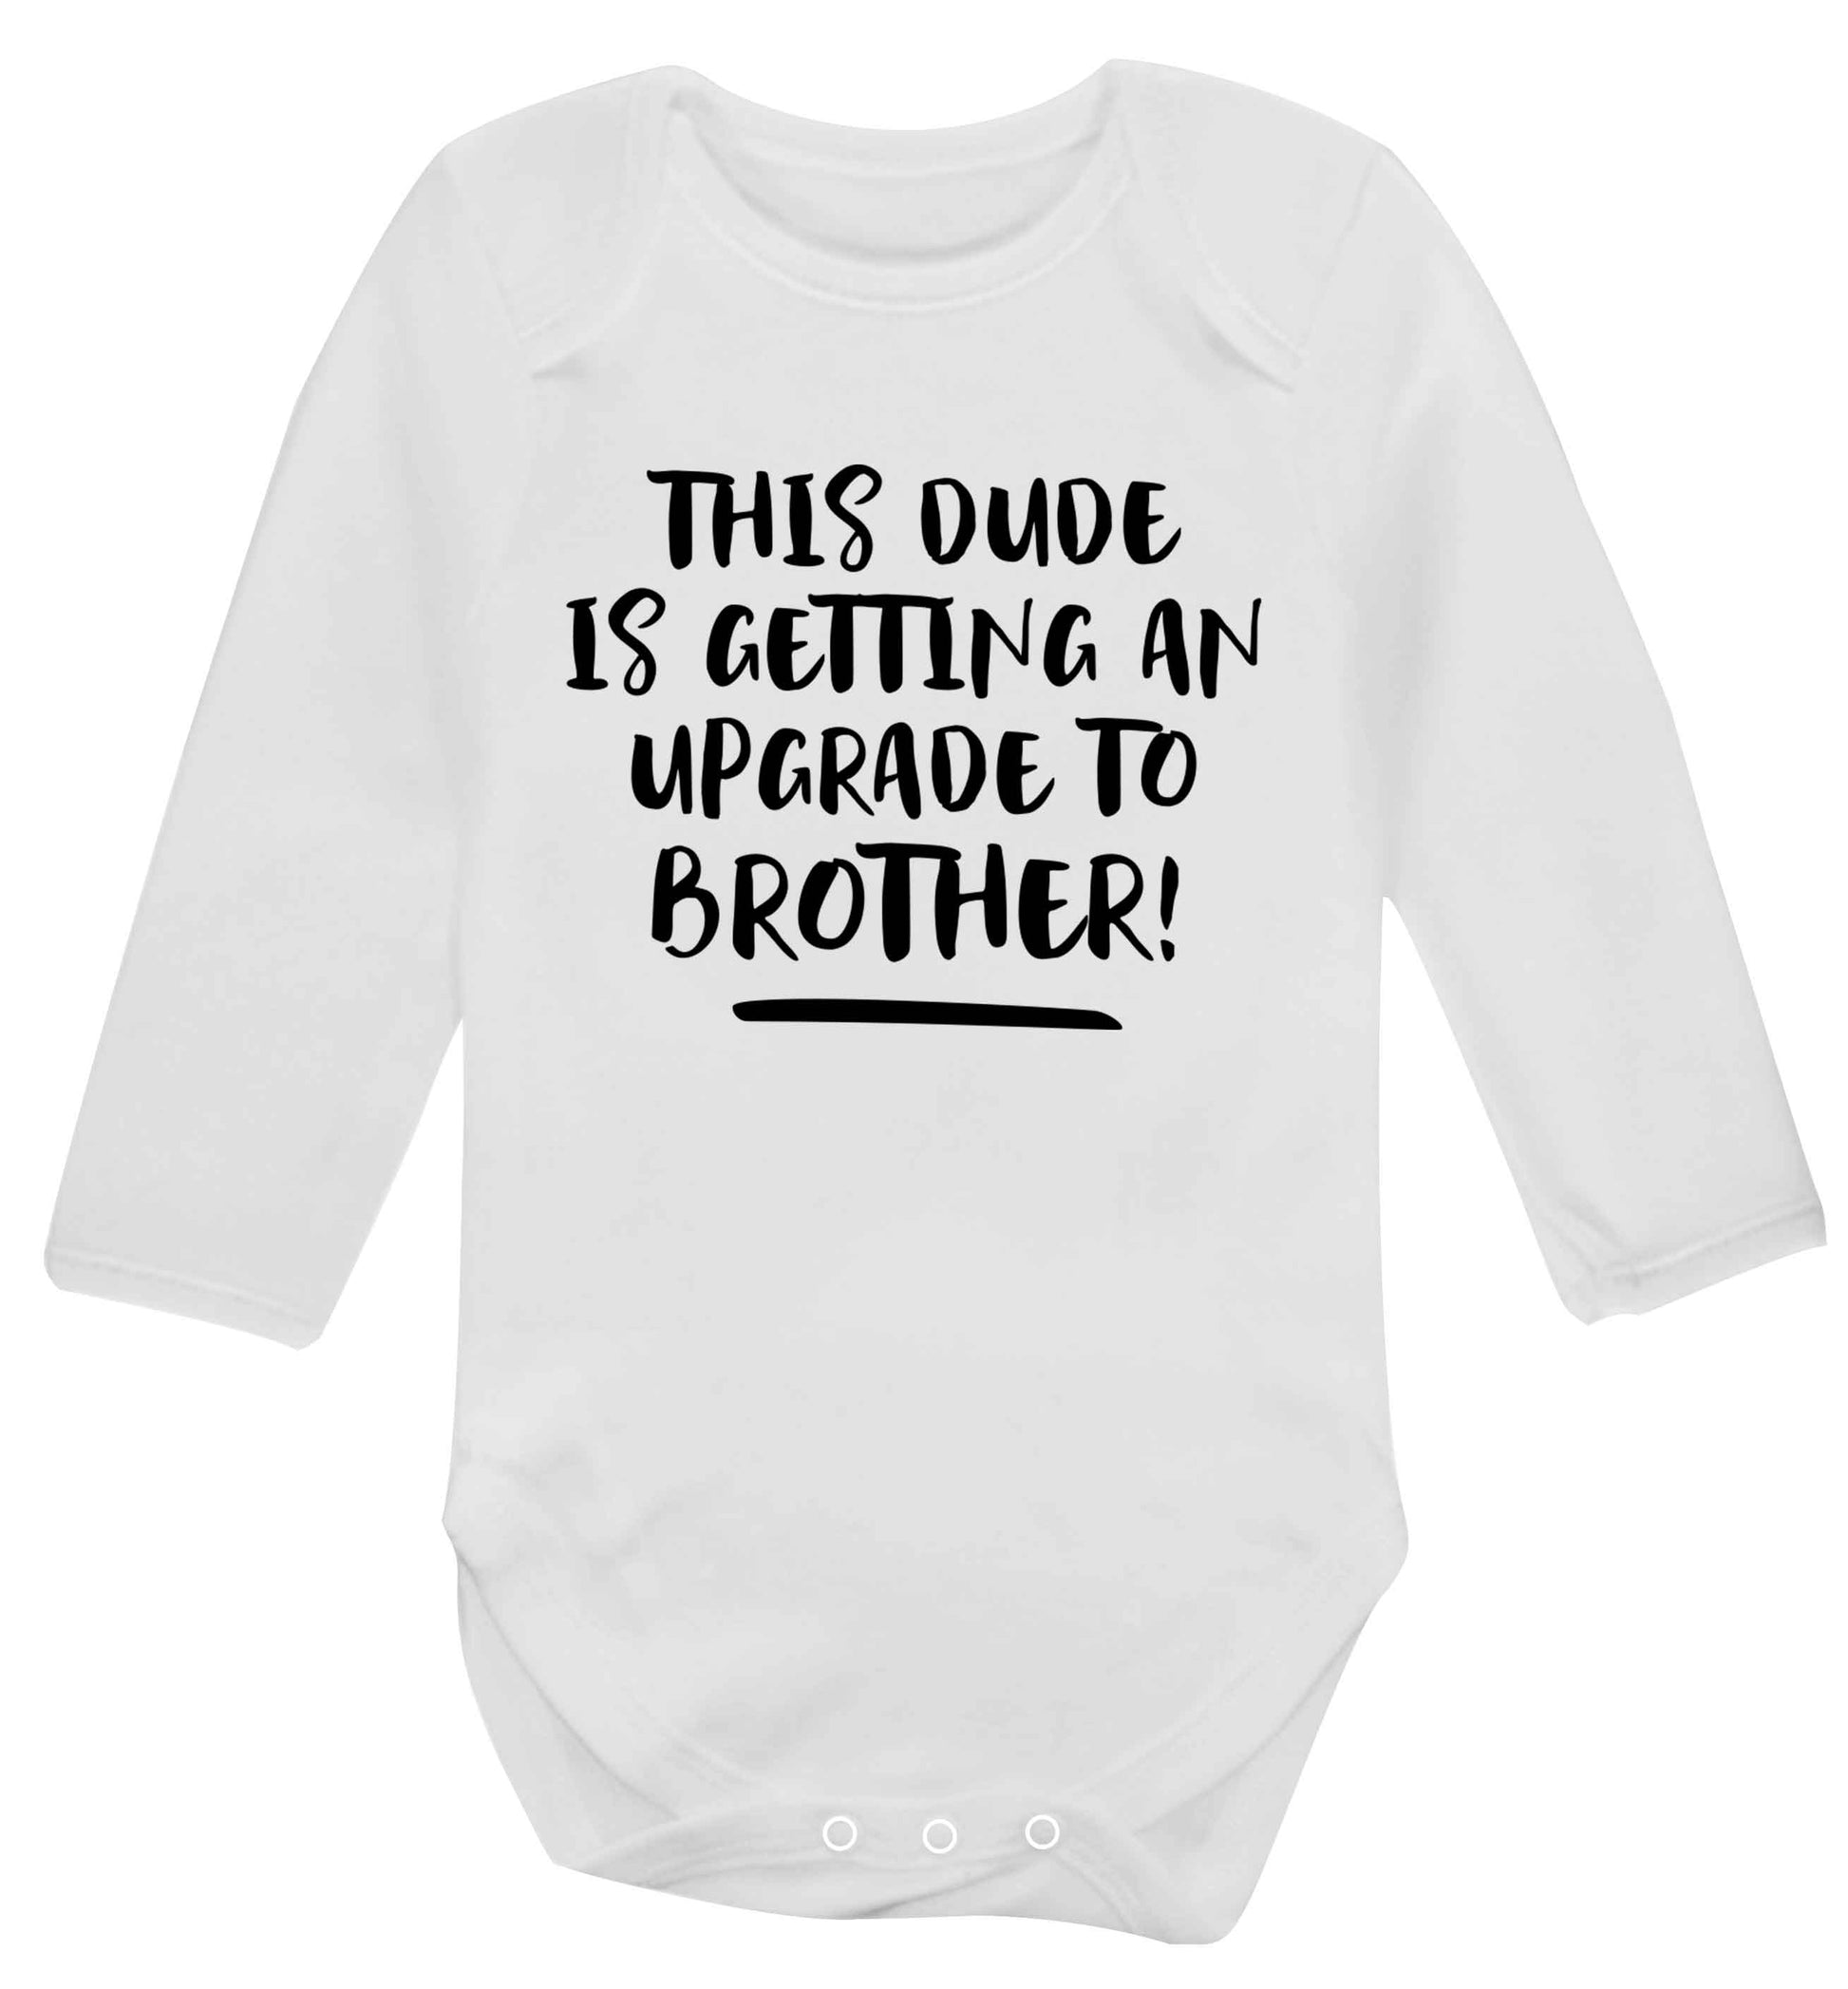 This dude is getting an upgrade to brother! Baby Vest long sleeved white 6-12 months